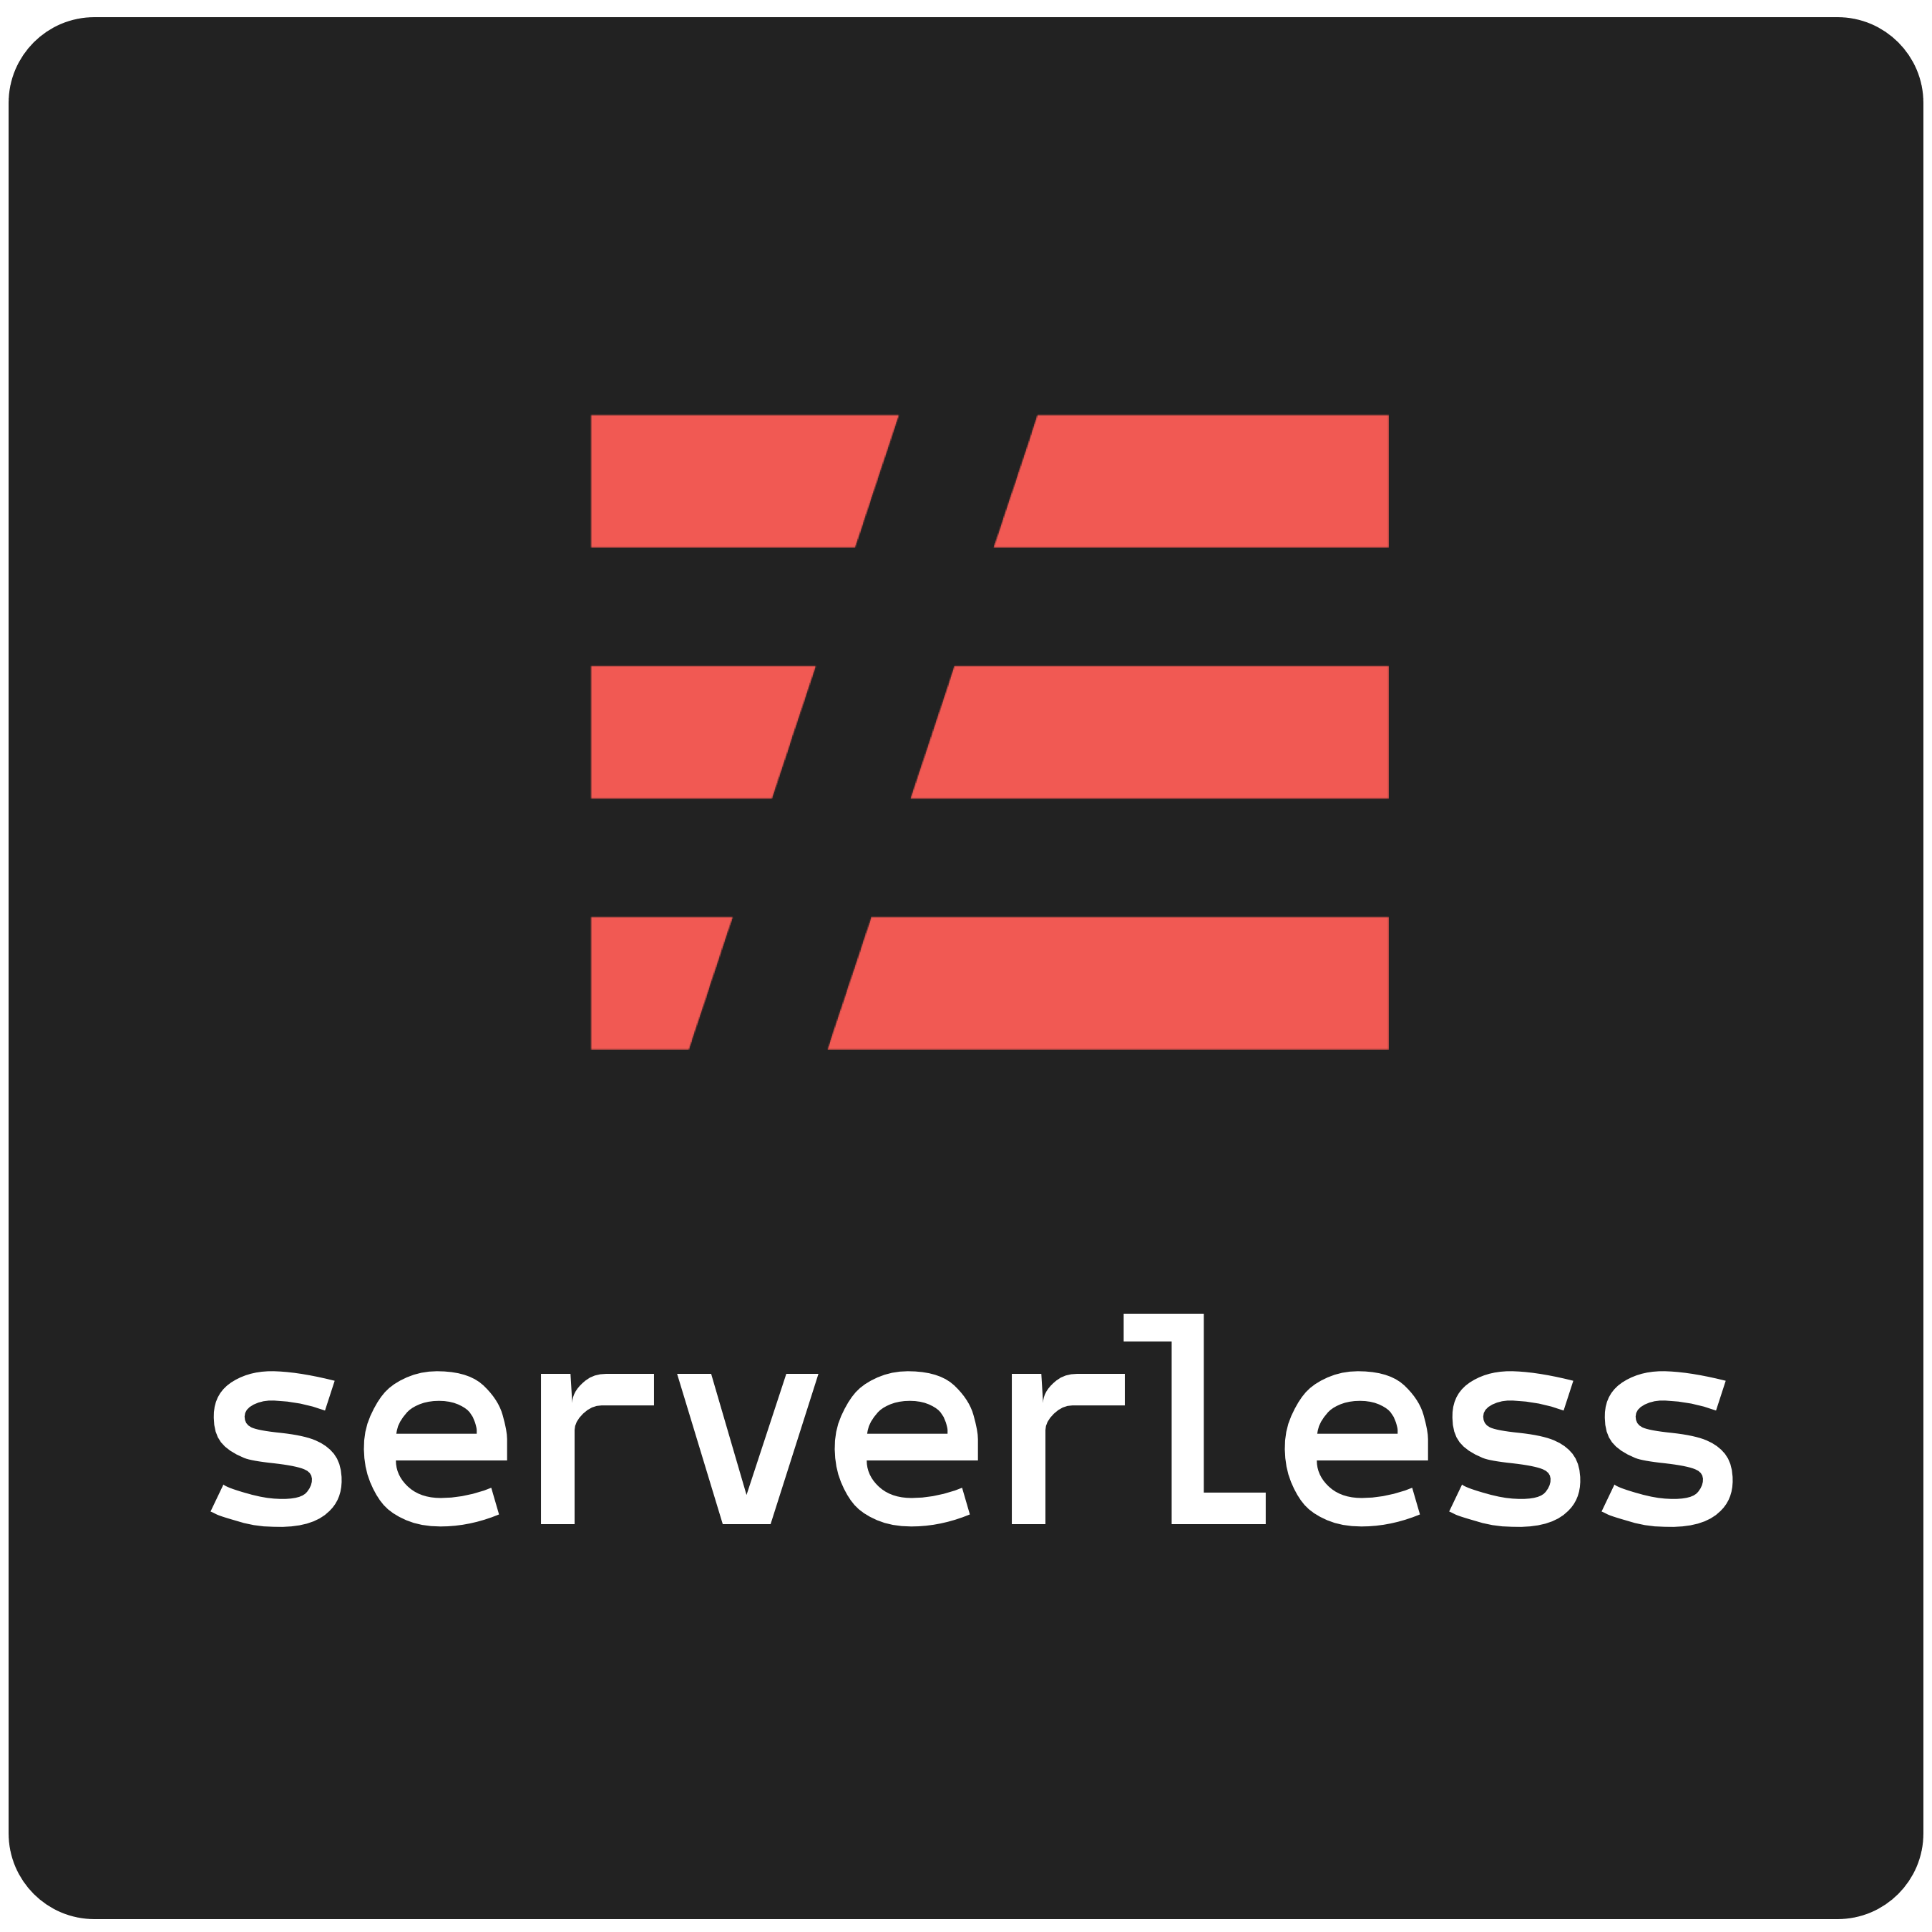 Serverless Offline causes MongoDb Atlas to run out of connections